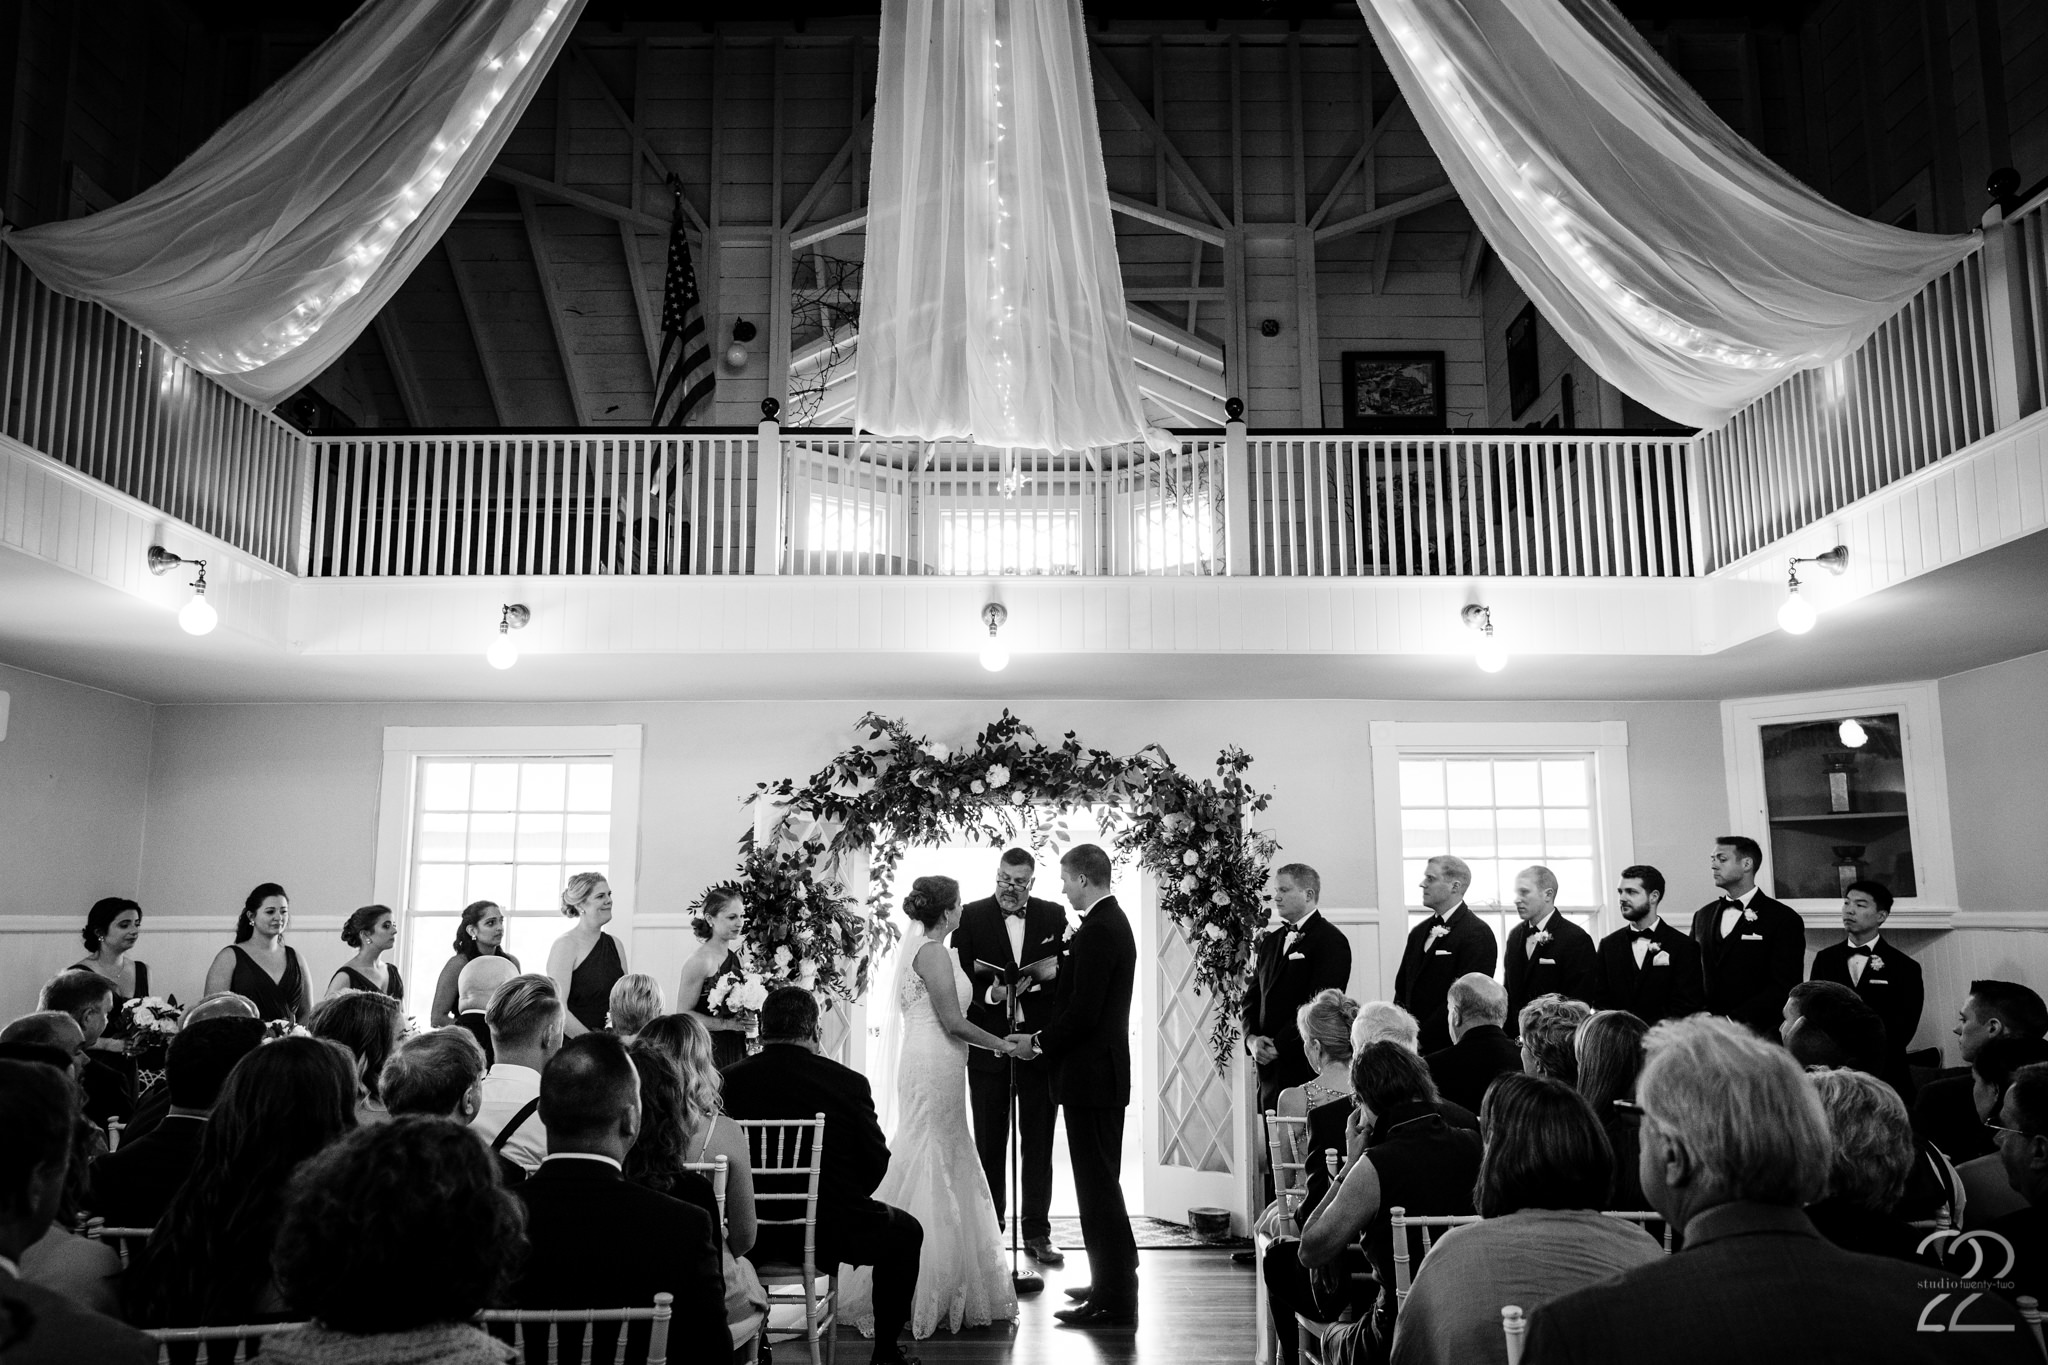  When weather derails outdoor plans it can be stressful. Thankfully the wedding planner and York Golf & Tennis Club had things under control and created a beautiful indoor ceremony for Andrea and Patrick. 